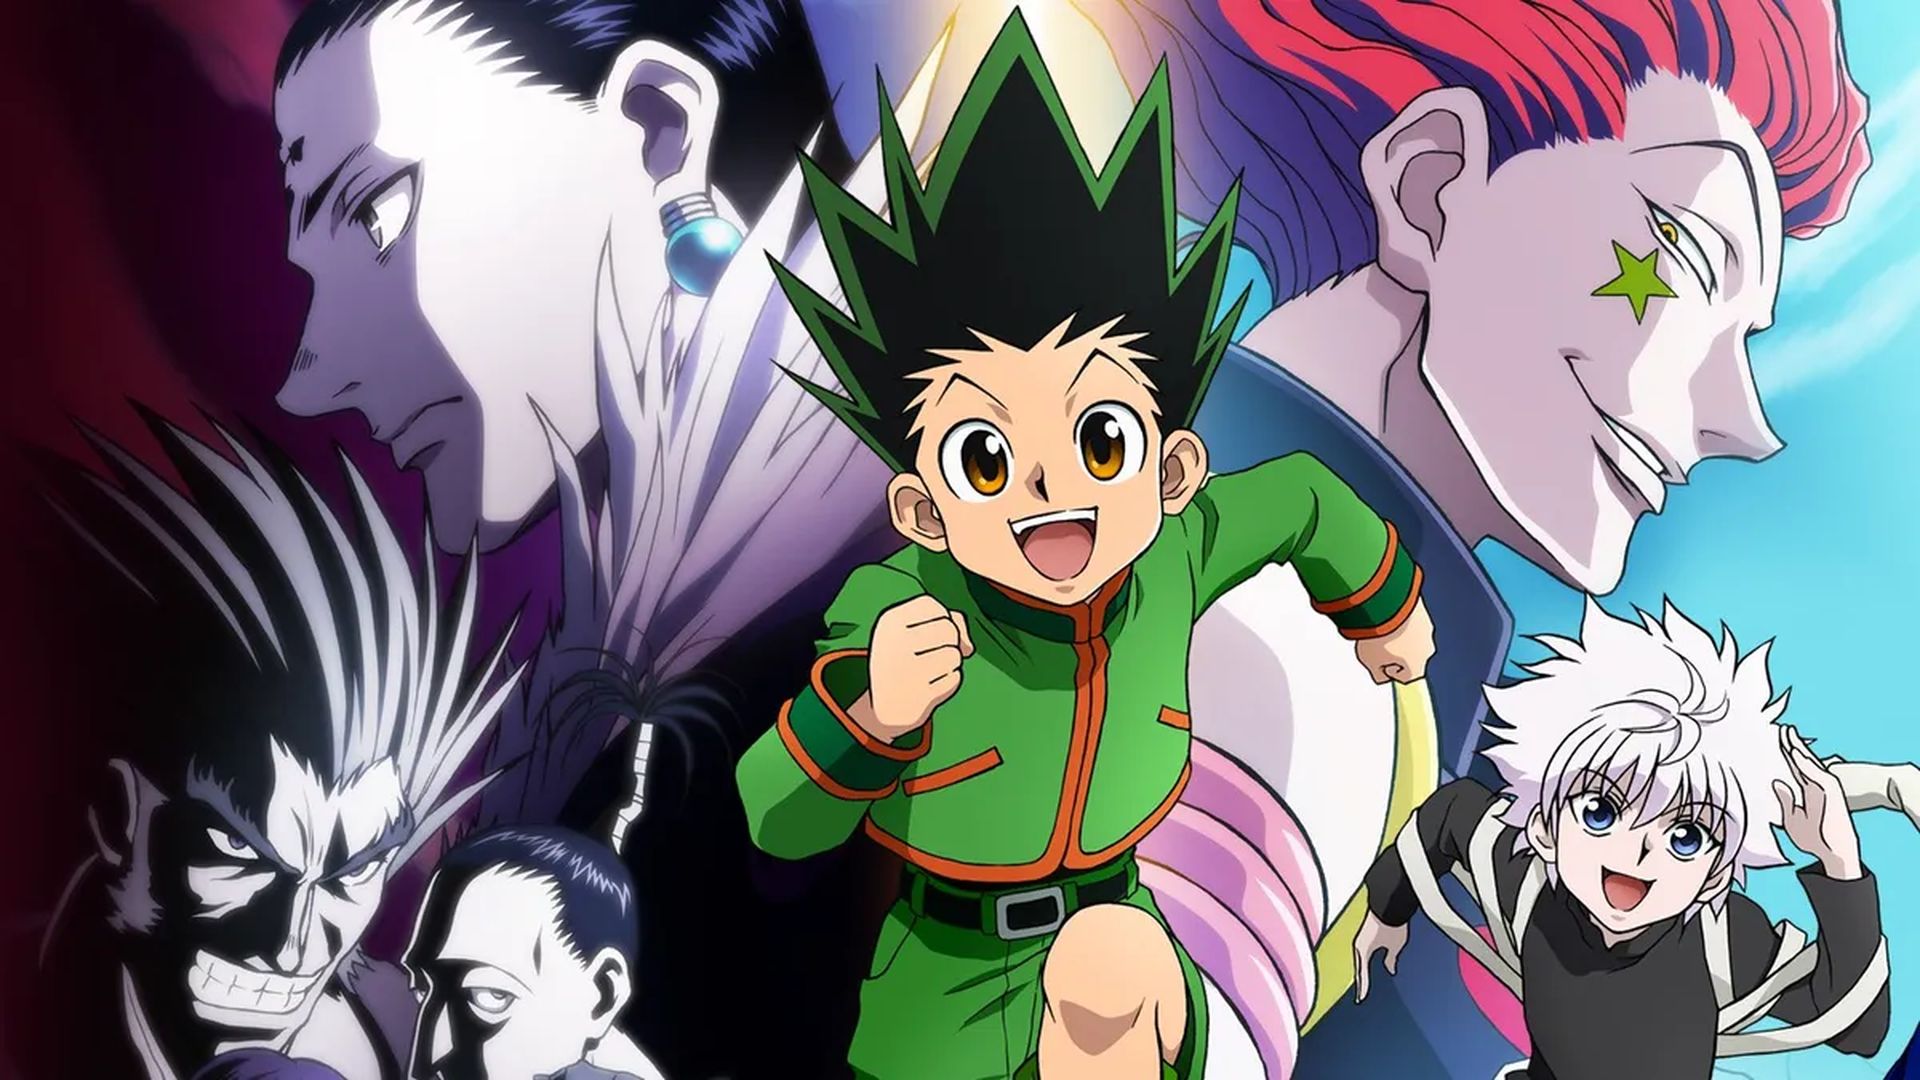 Today we are here to review all HxH Season 7 rumors about trailer, release date, plot and more.